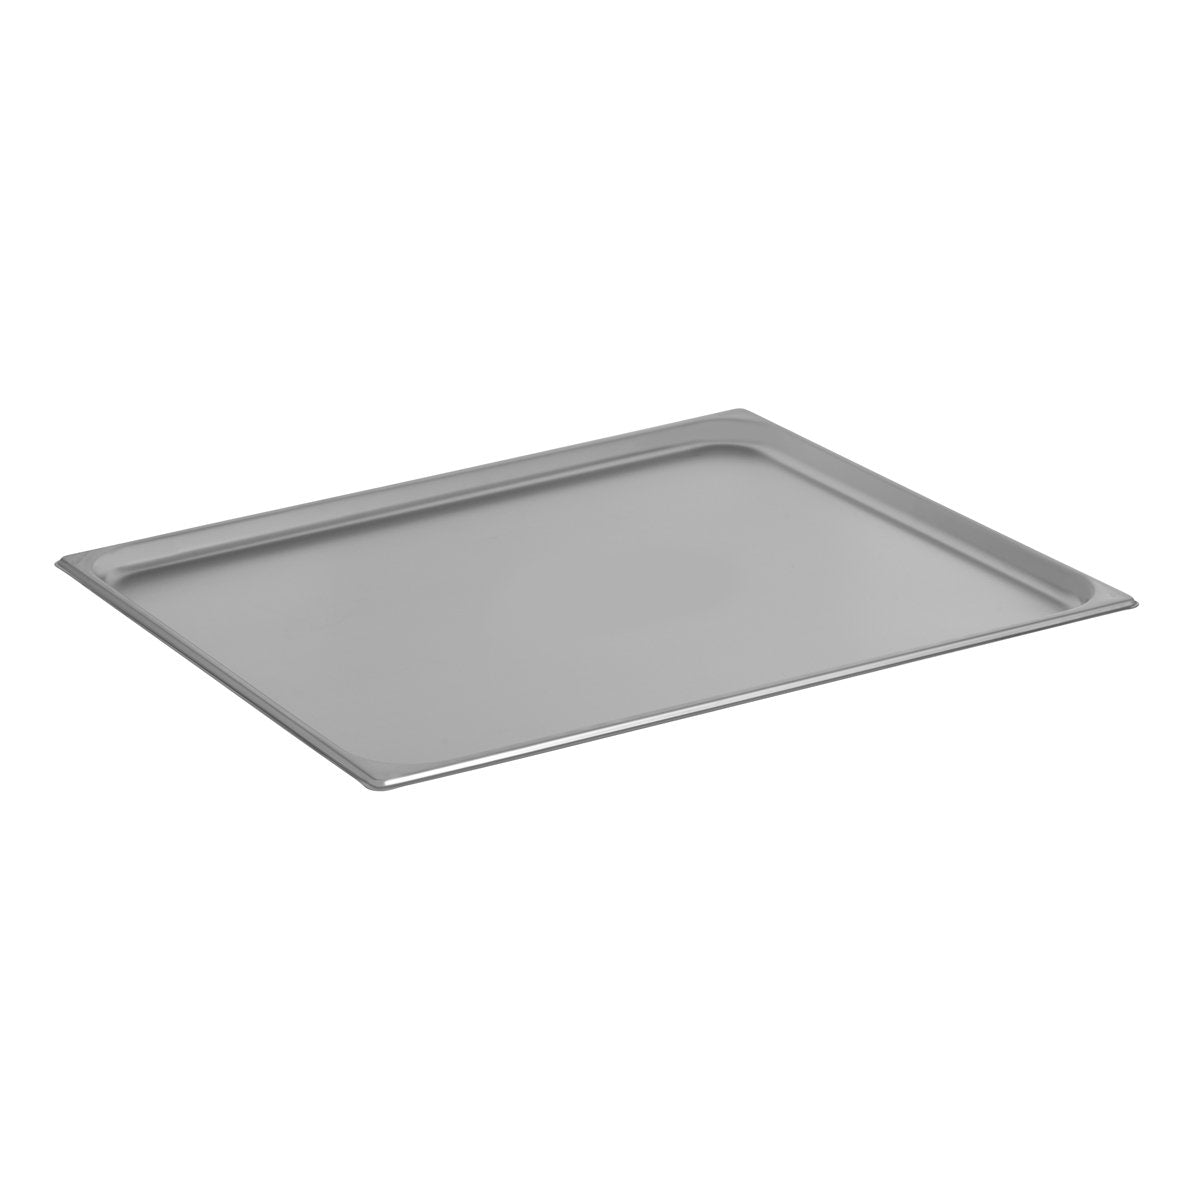 GN-21020 Chef Inox Gastronorm Pan 2/1 Size 20mm Tomkin Australia Hospitality Supplies